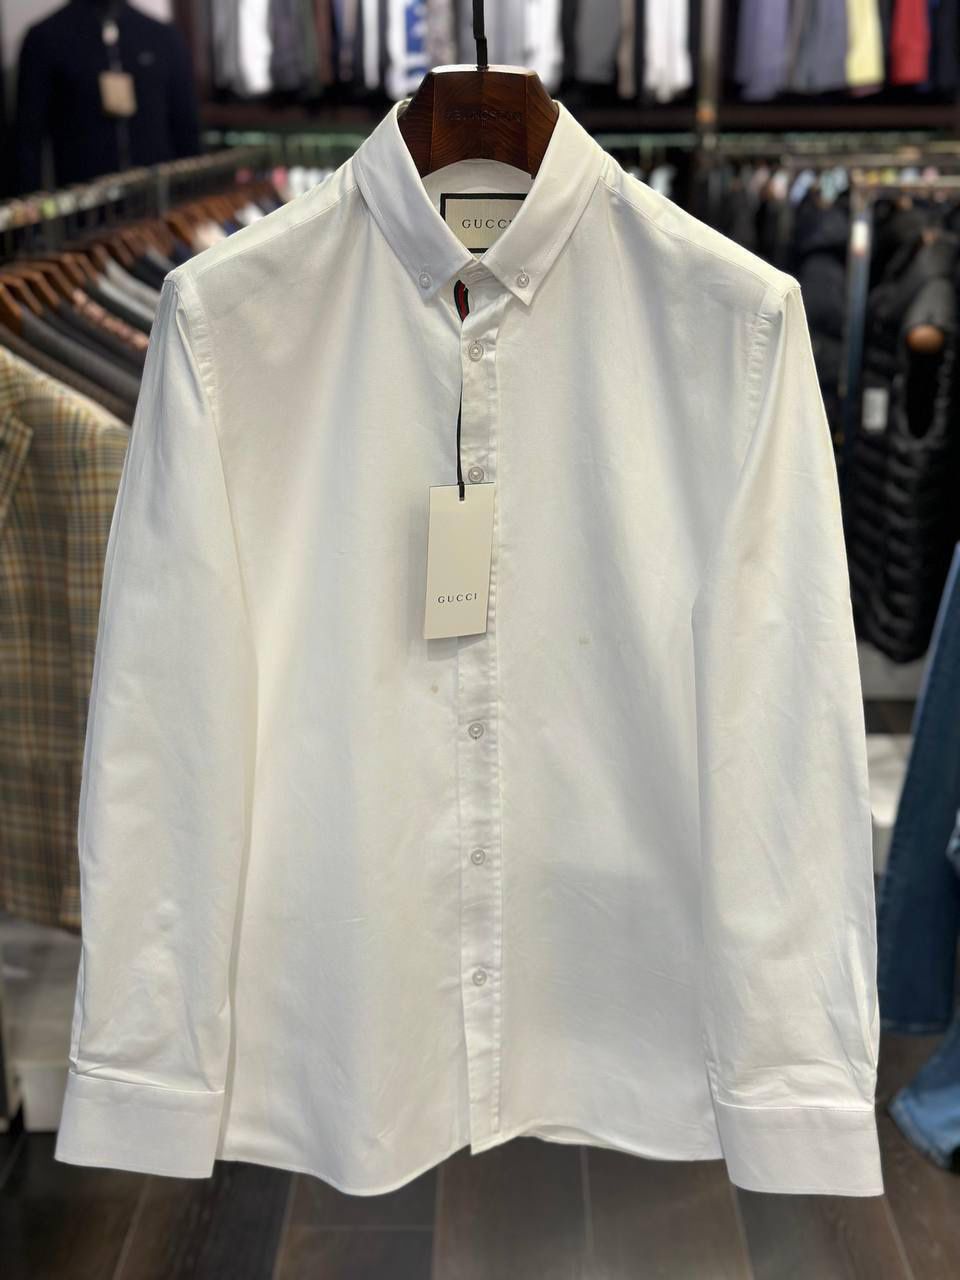 Gucci Men's Shirt 100%Cotton Made In Italy Original